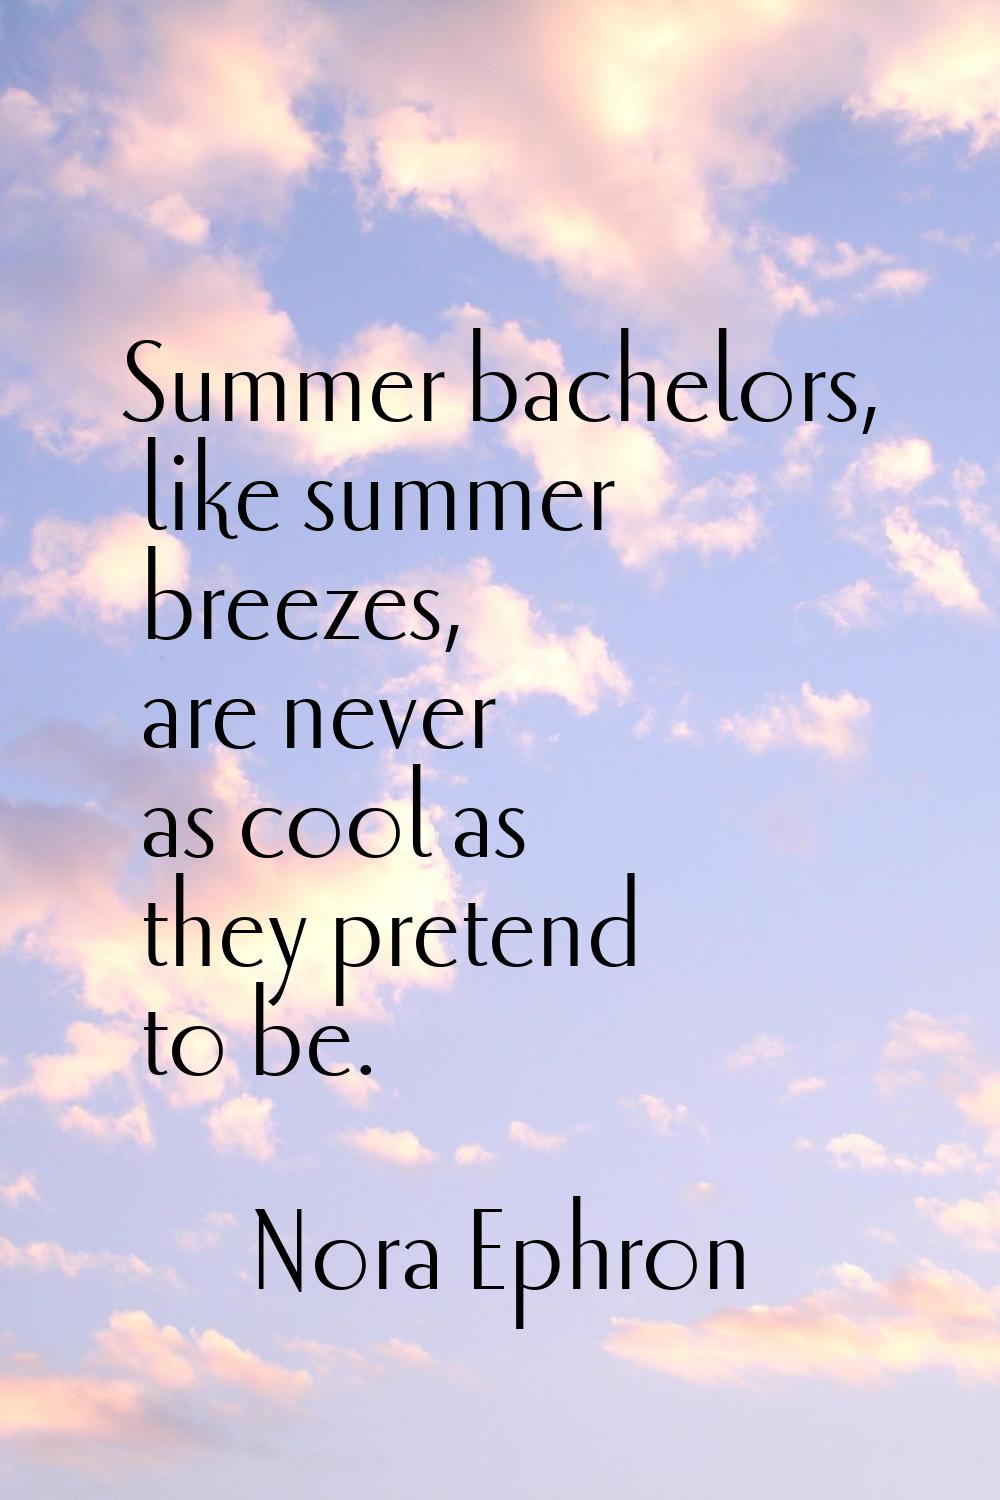 Summer bachelors, like summer breezes, are never as cool as they pretend to be.